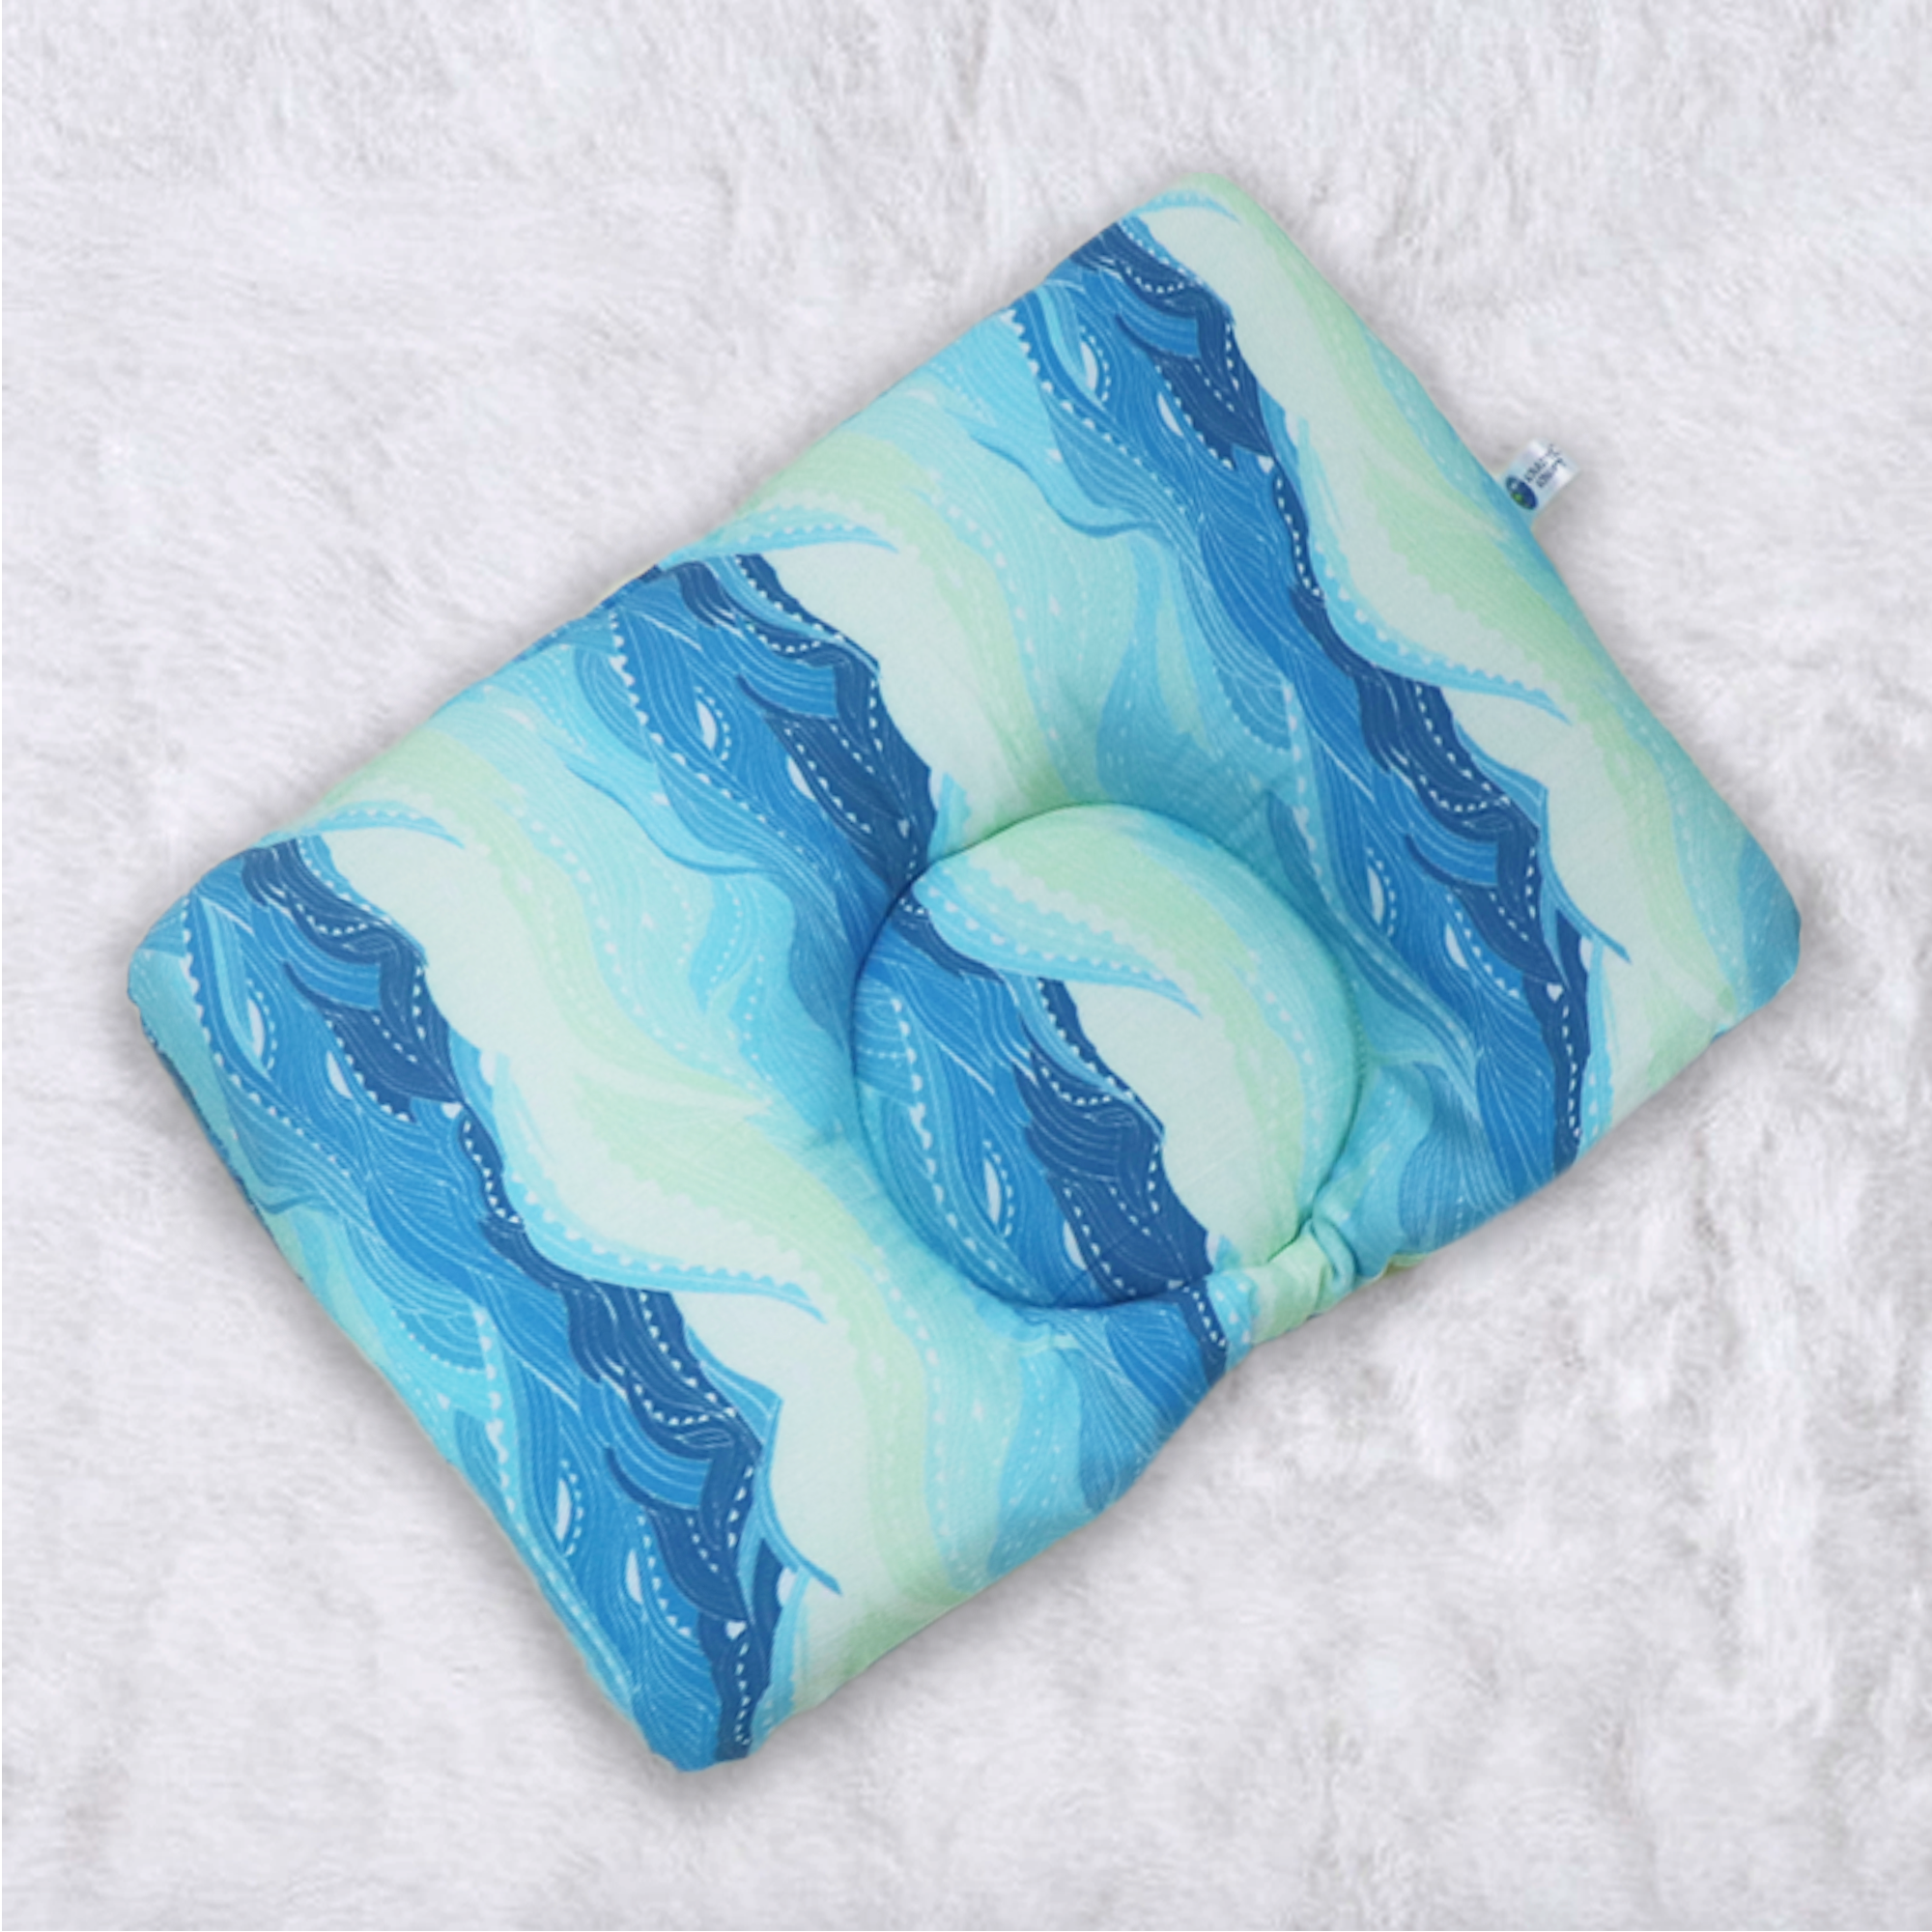 Waves New Born Pillow | Baby Pillow | Head Shaping Pillow